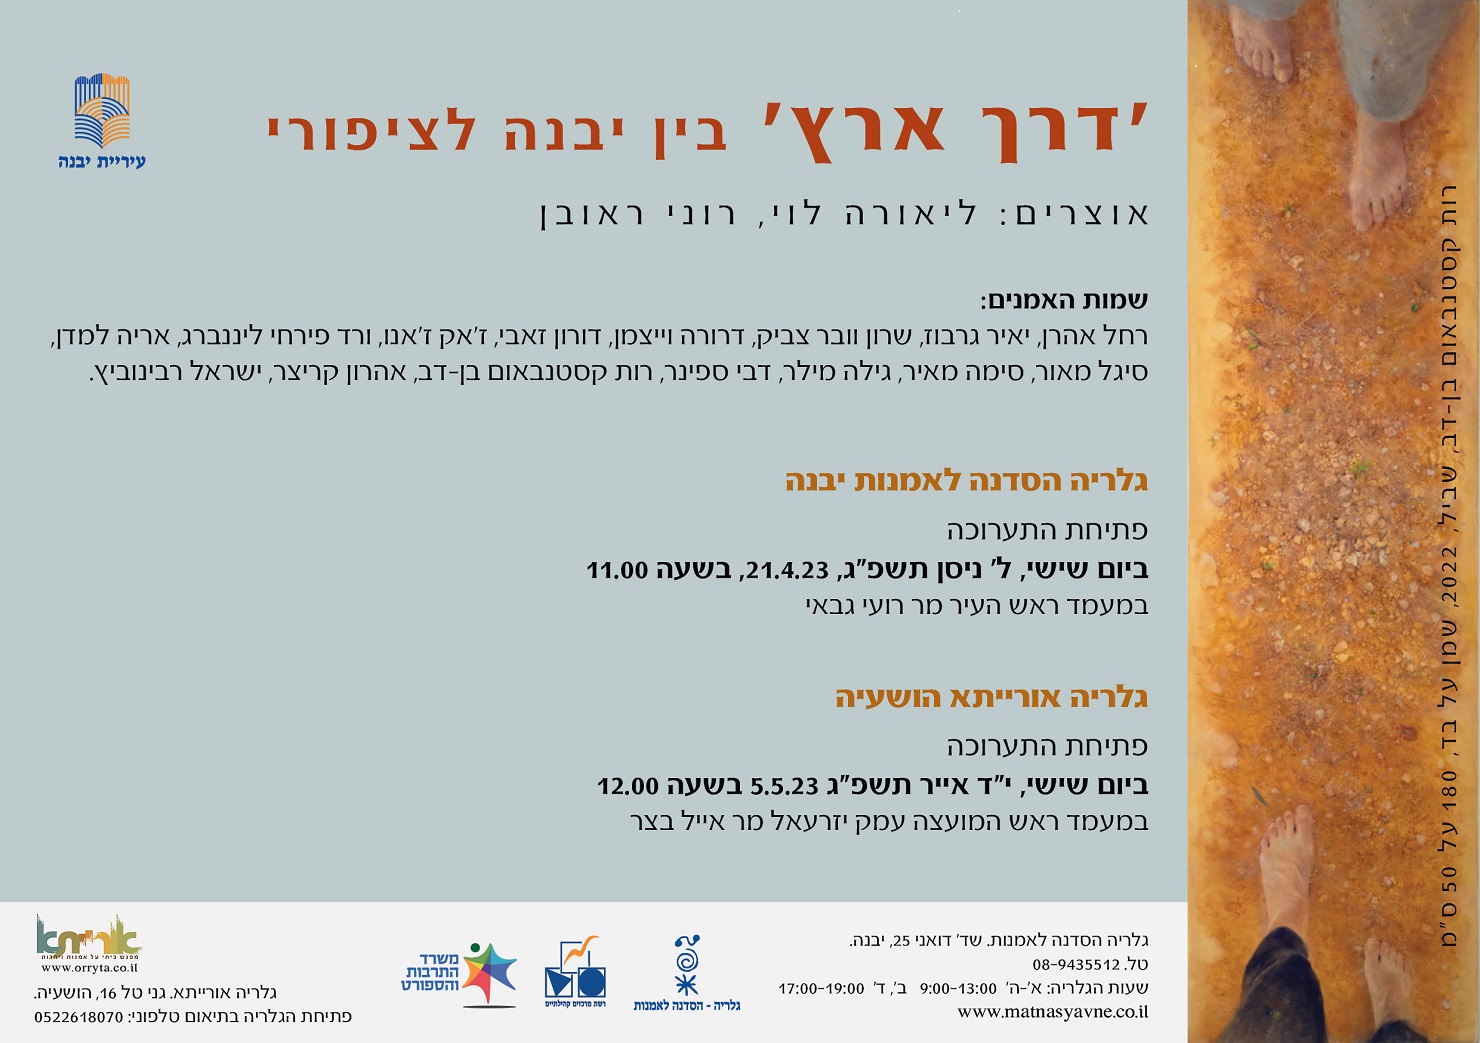 Hebrew invitation with painting of path at right